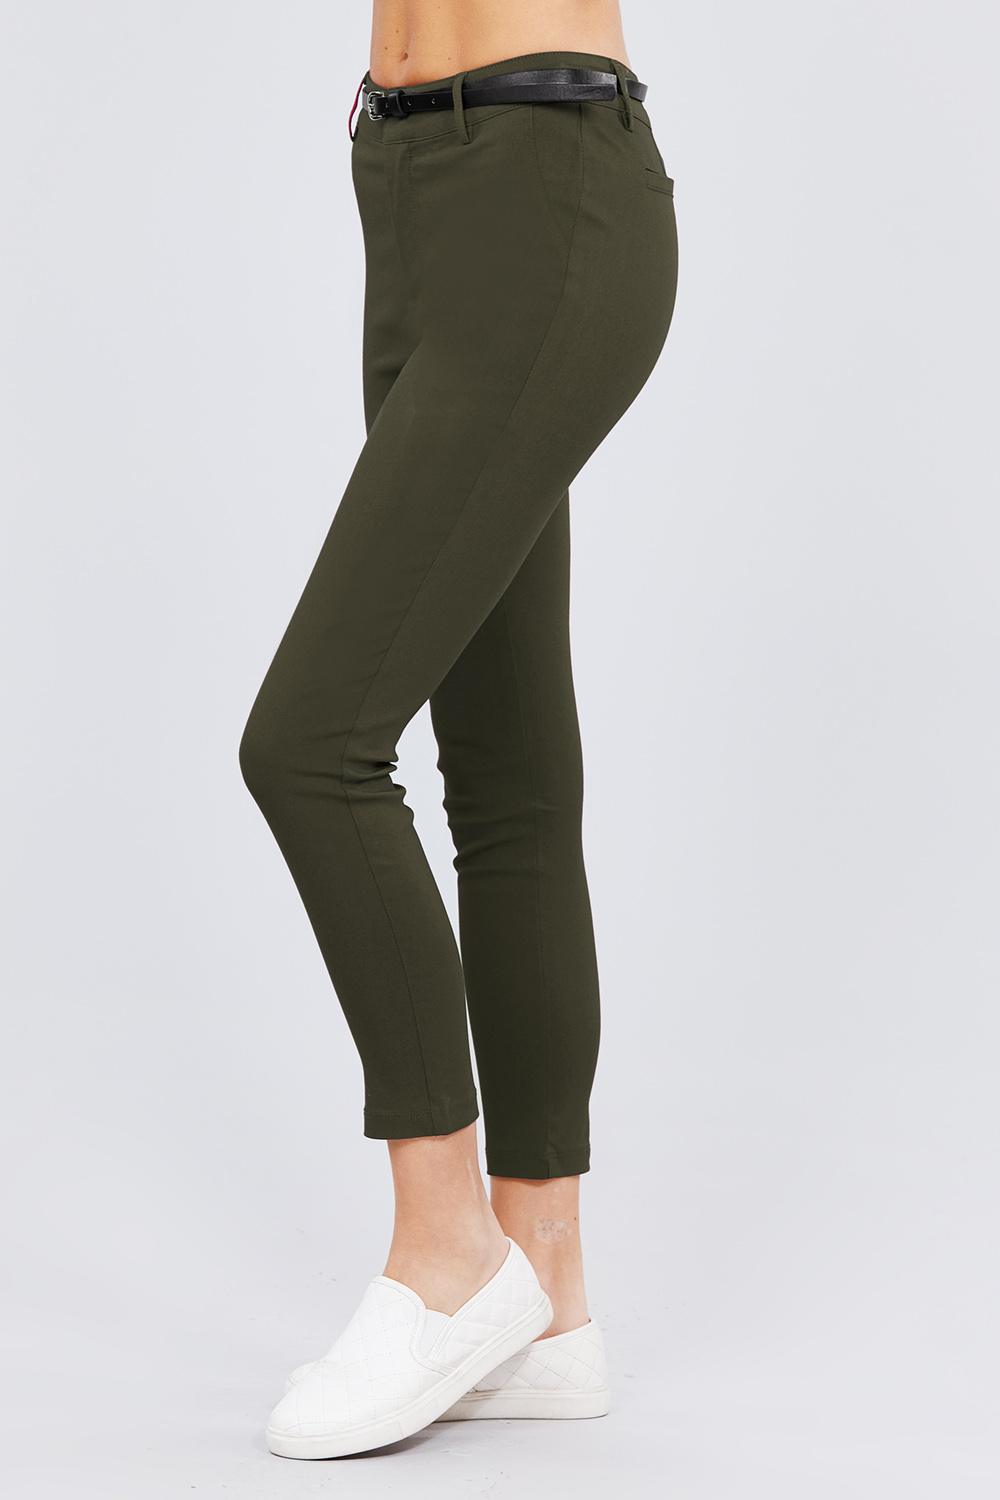 Low Waisted Belted Skinny Pants